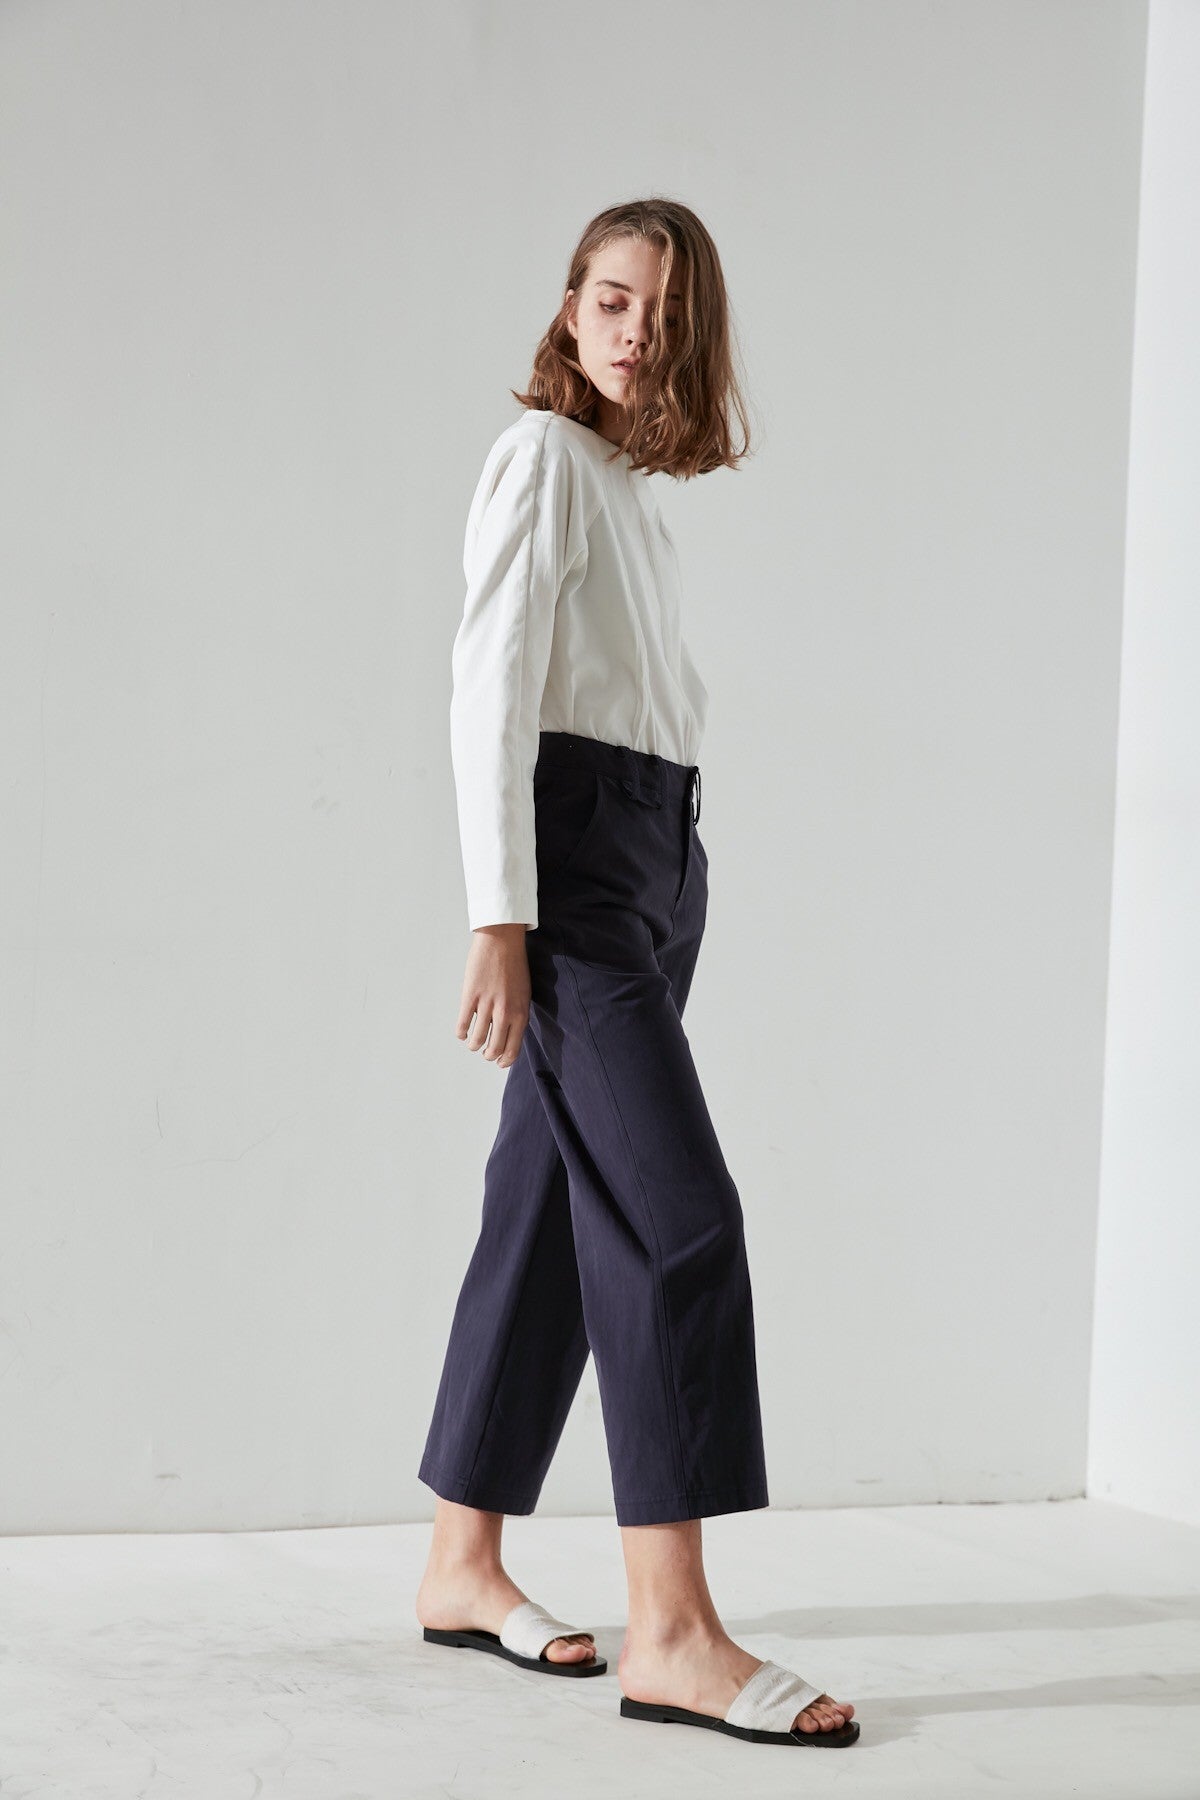 SKYE San Francisco SF California shop ethical sustainable modern minimalist quality women clothing fashion Fayette Cropped Pants